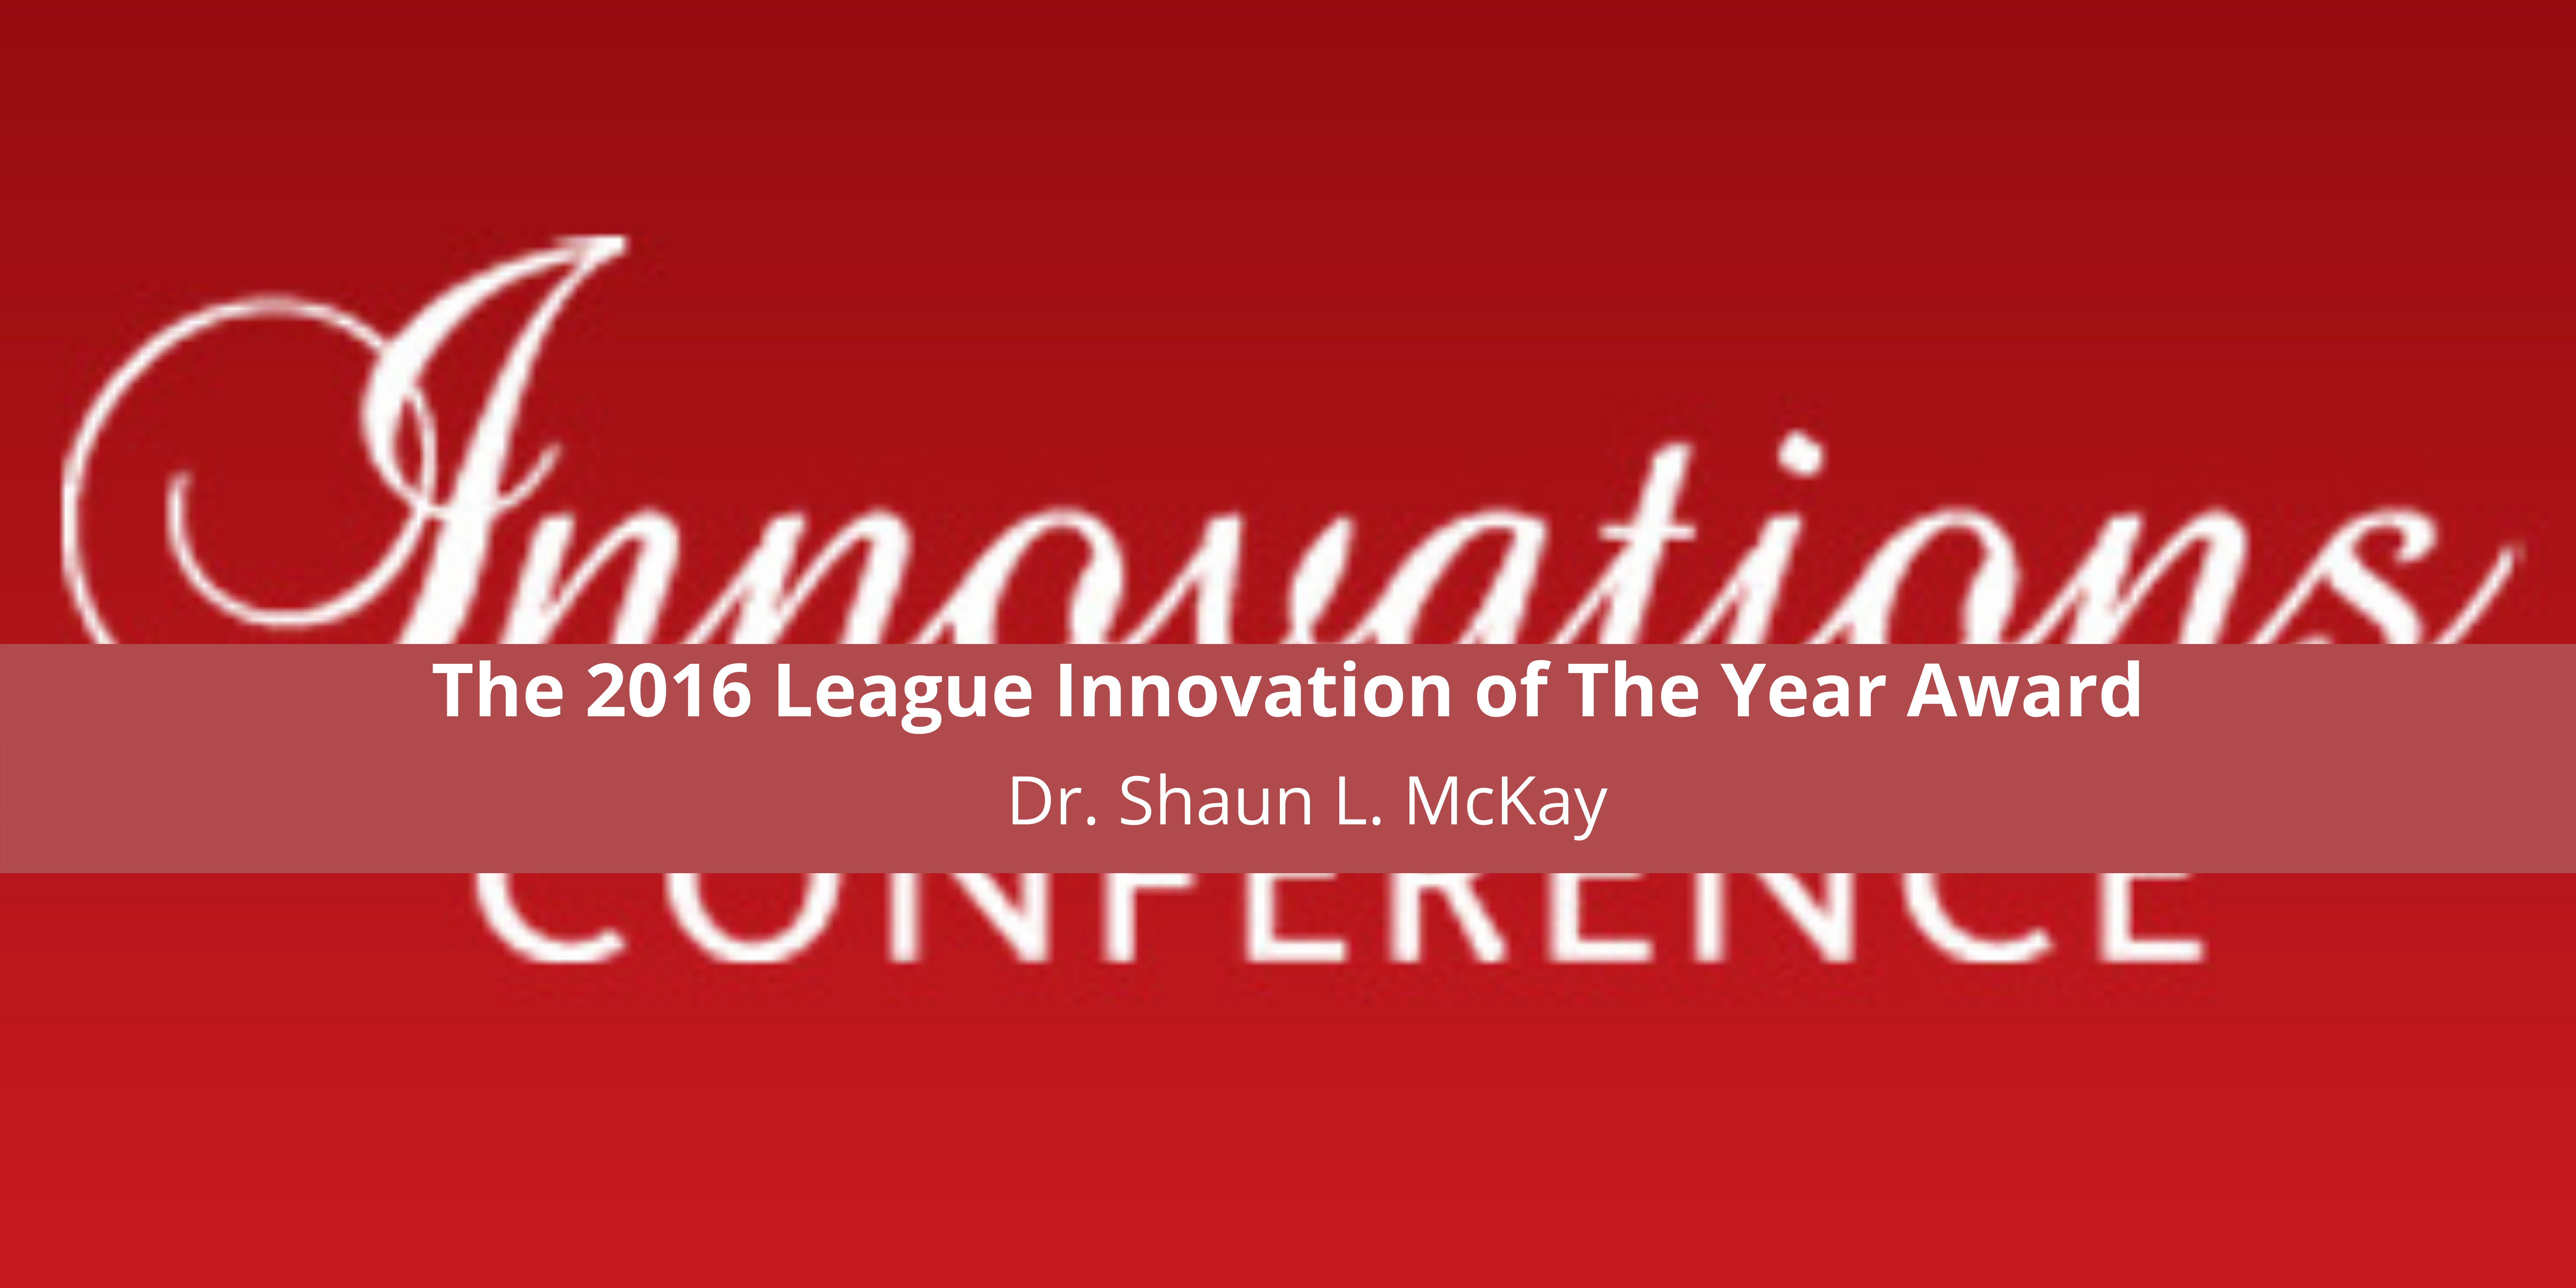 The 2016 League Innovation of The Year Award